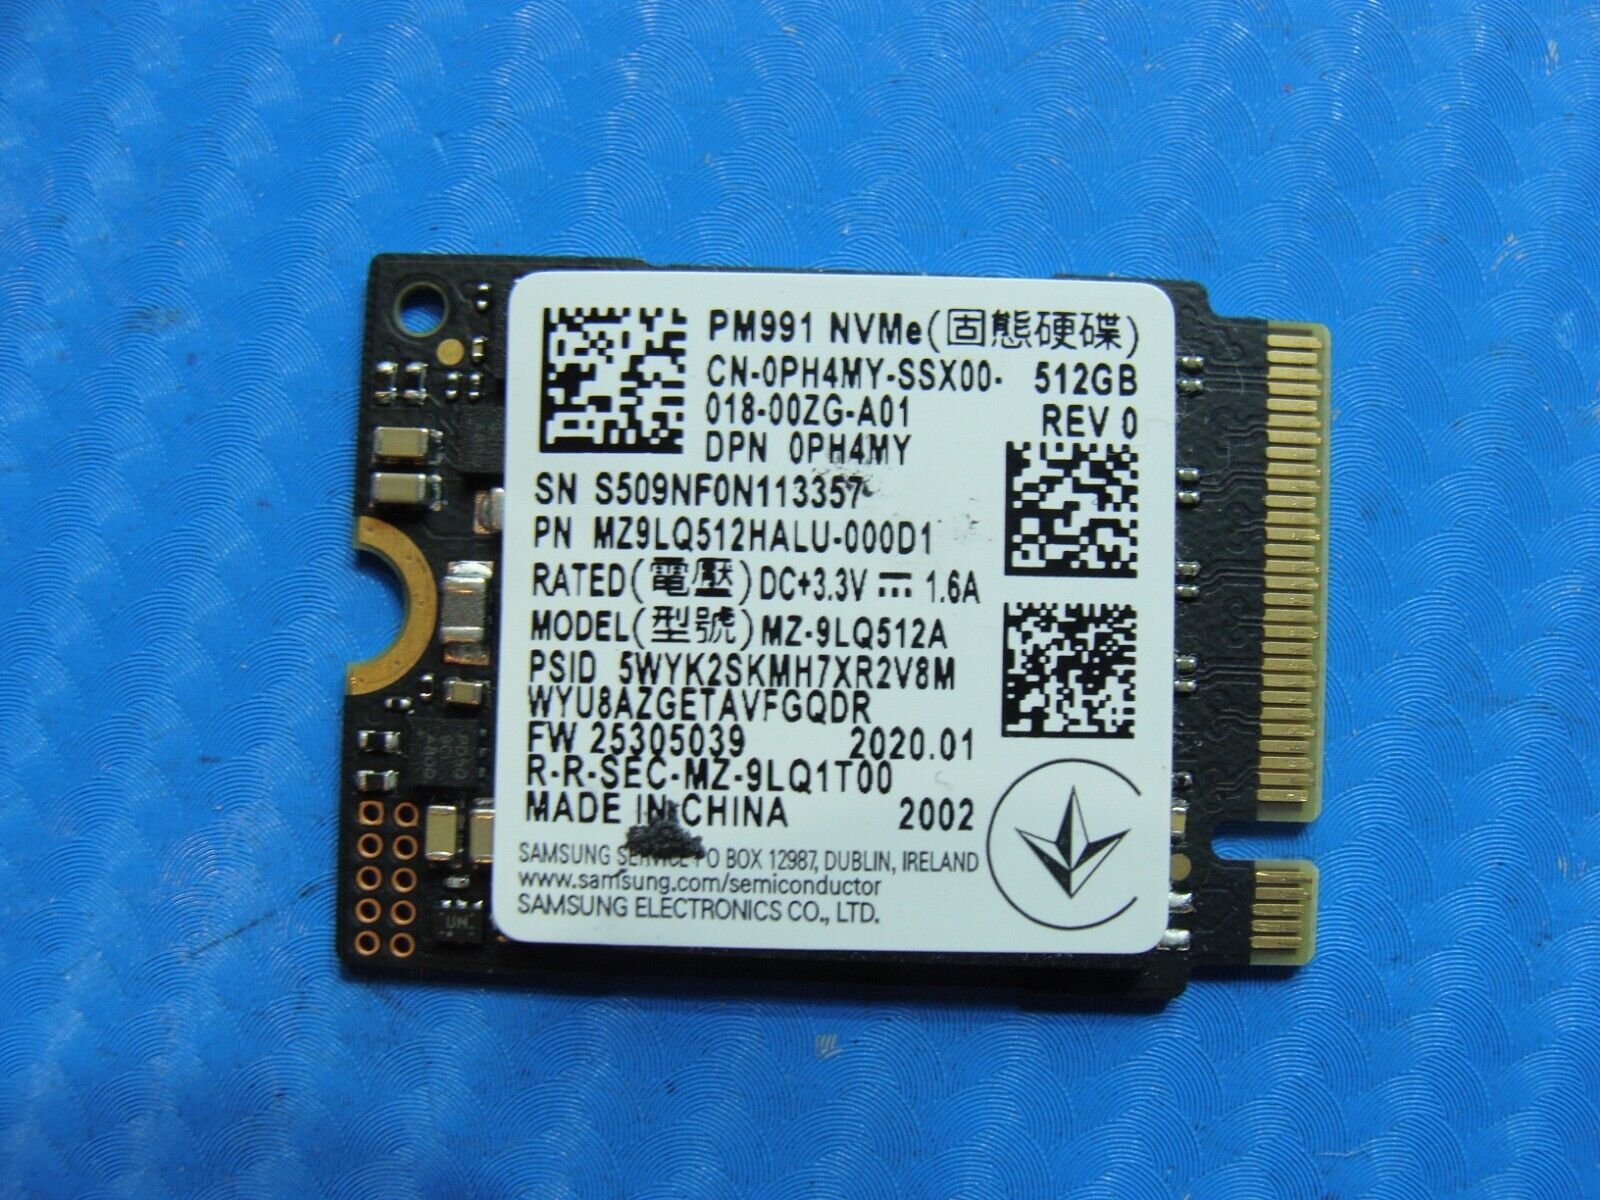 Dell 5300 Samsung PM991 512GB NVMe M.2 SSD Solid State Drive MZ-9LQ512A PH4MY